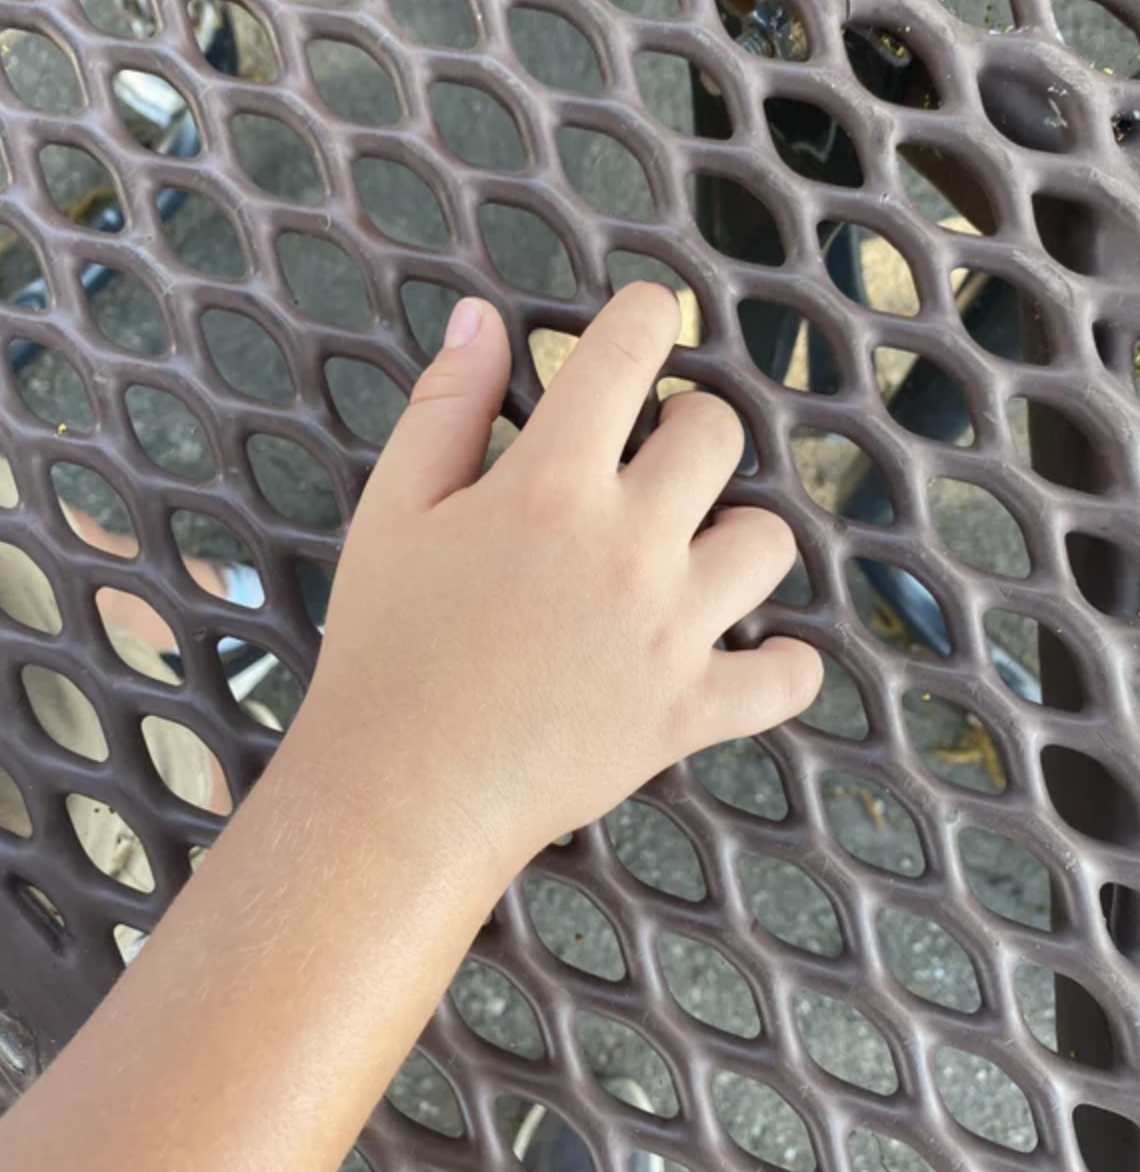 fingers stuck in a table